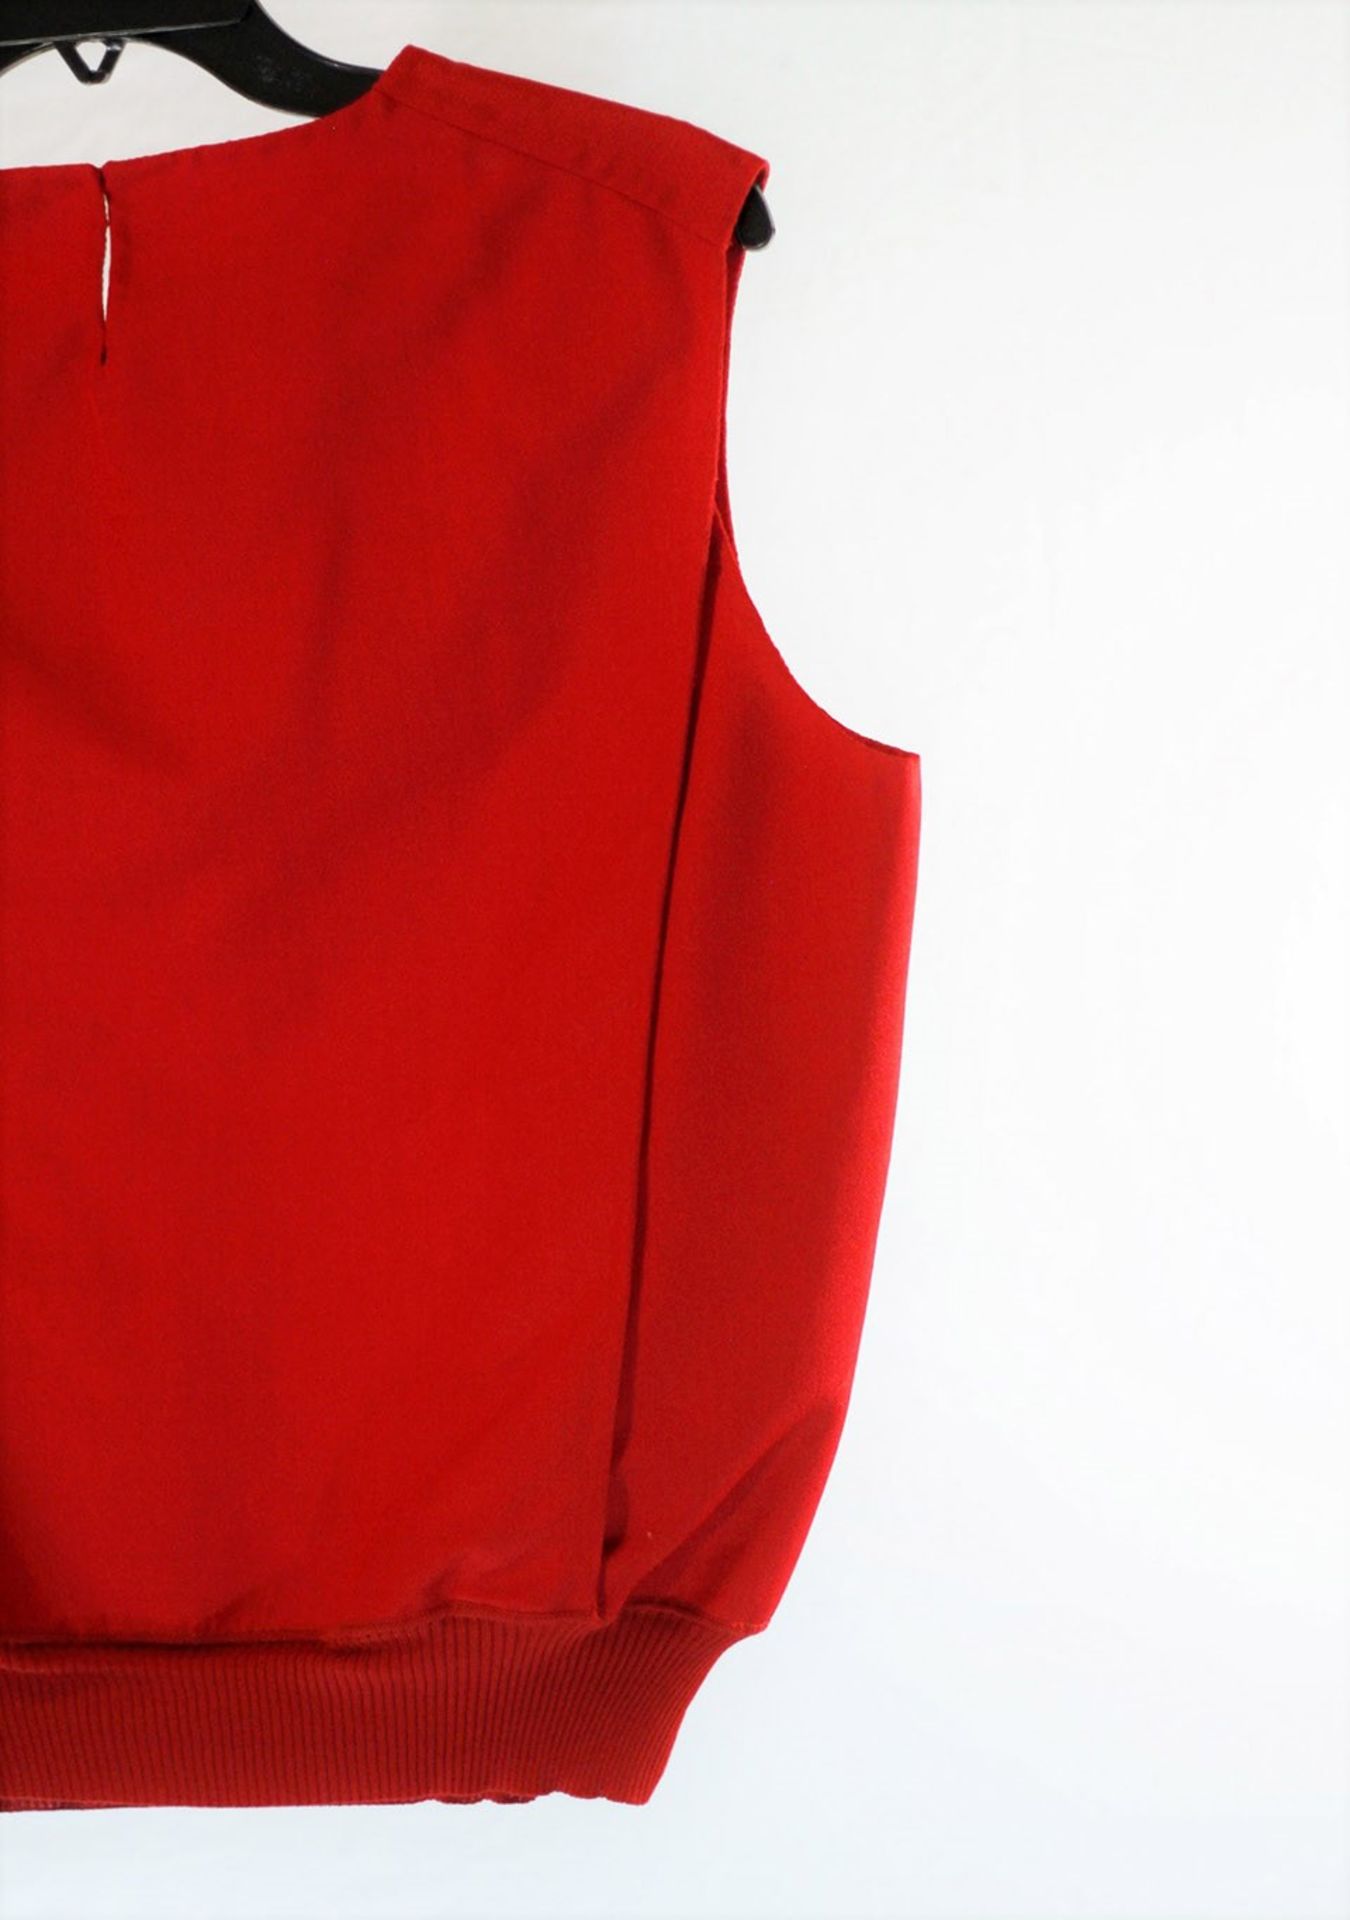 1 x Agnona Red Vest - Size: 18 - Material: 50% Cotton, 28% Mohair, 18% Silk, 4% Wool. Details 55% - Image 4 of 8